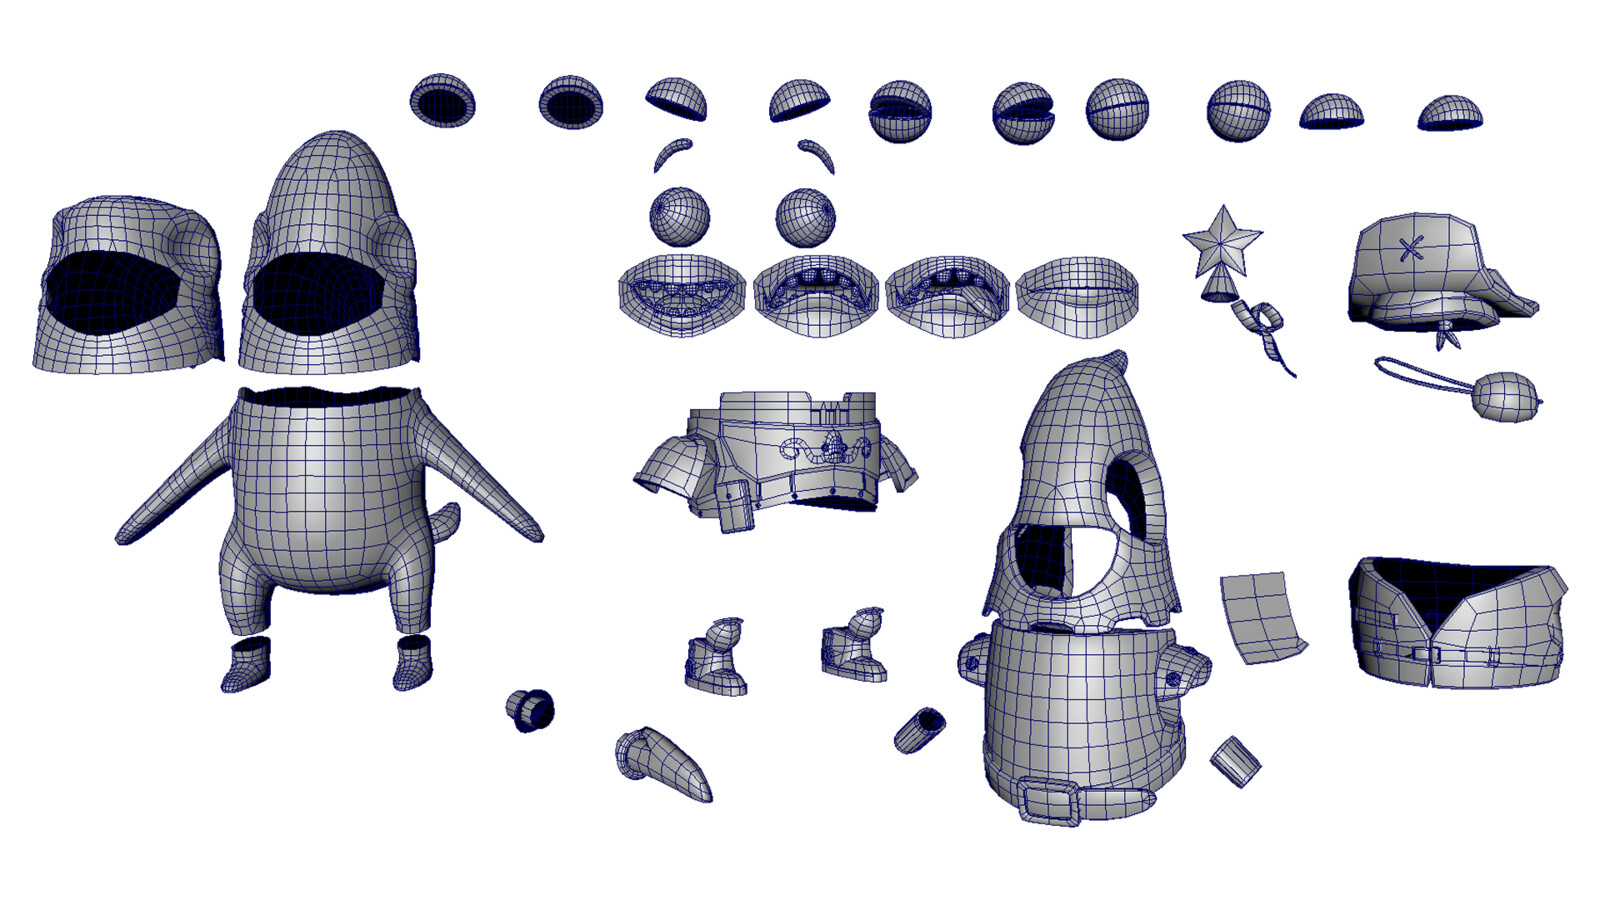 This is a look at almost all the unique meshes that make up Sharky. I learned a lot about making modular characters for the purpose of customization with this model. I may have got a bit carried away adding new outfits.